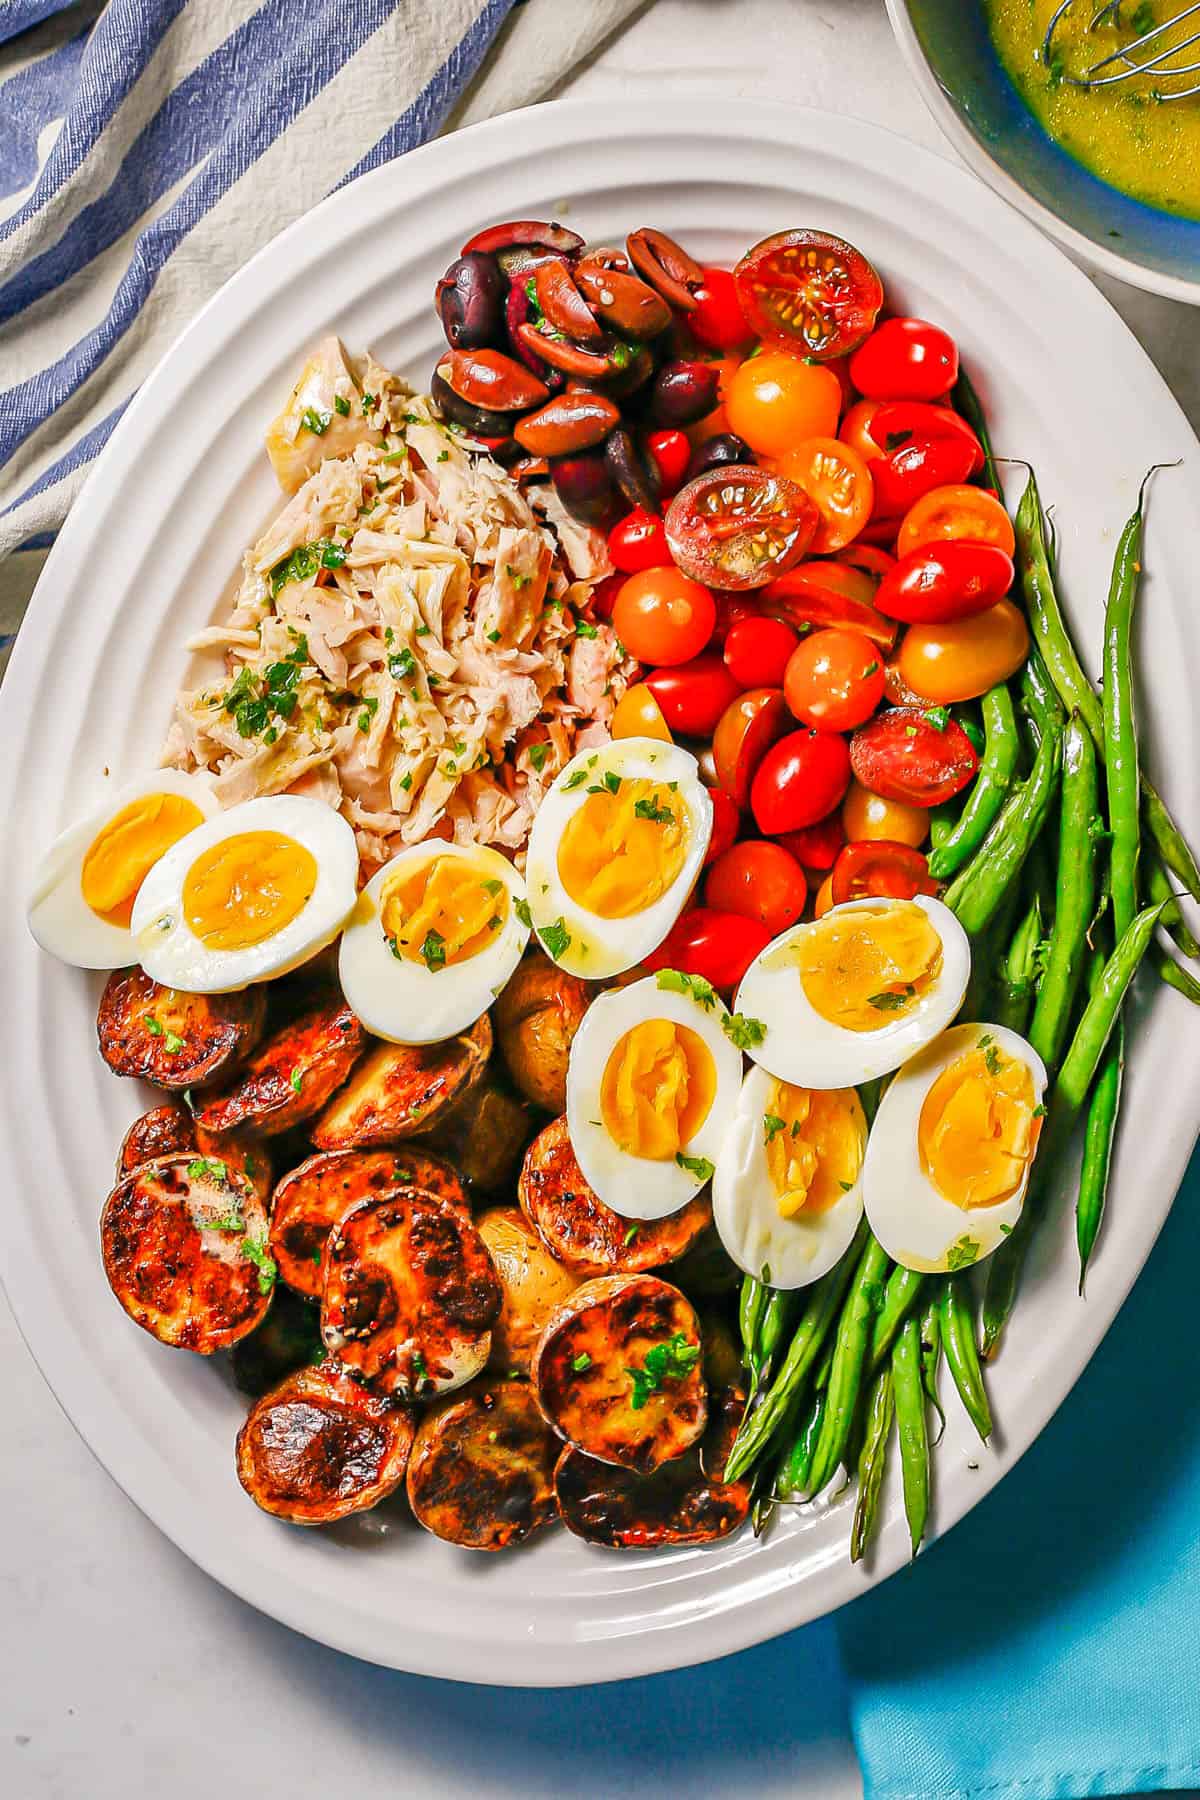 Niçoise salad with potatoes, hard boiled eggs, green beans, tomatoes, tuna and olives arranged on a large white platter.